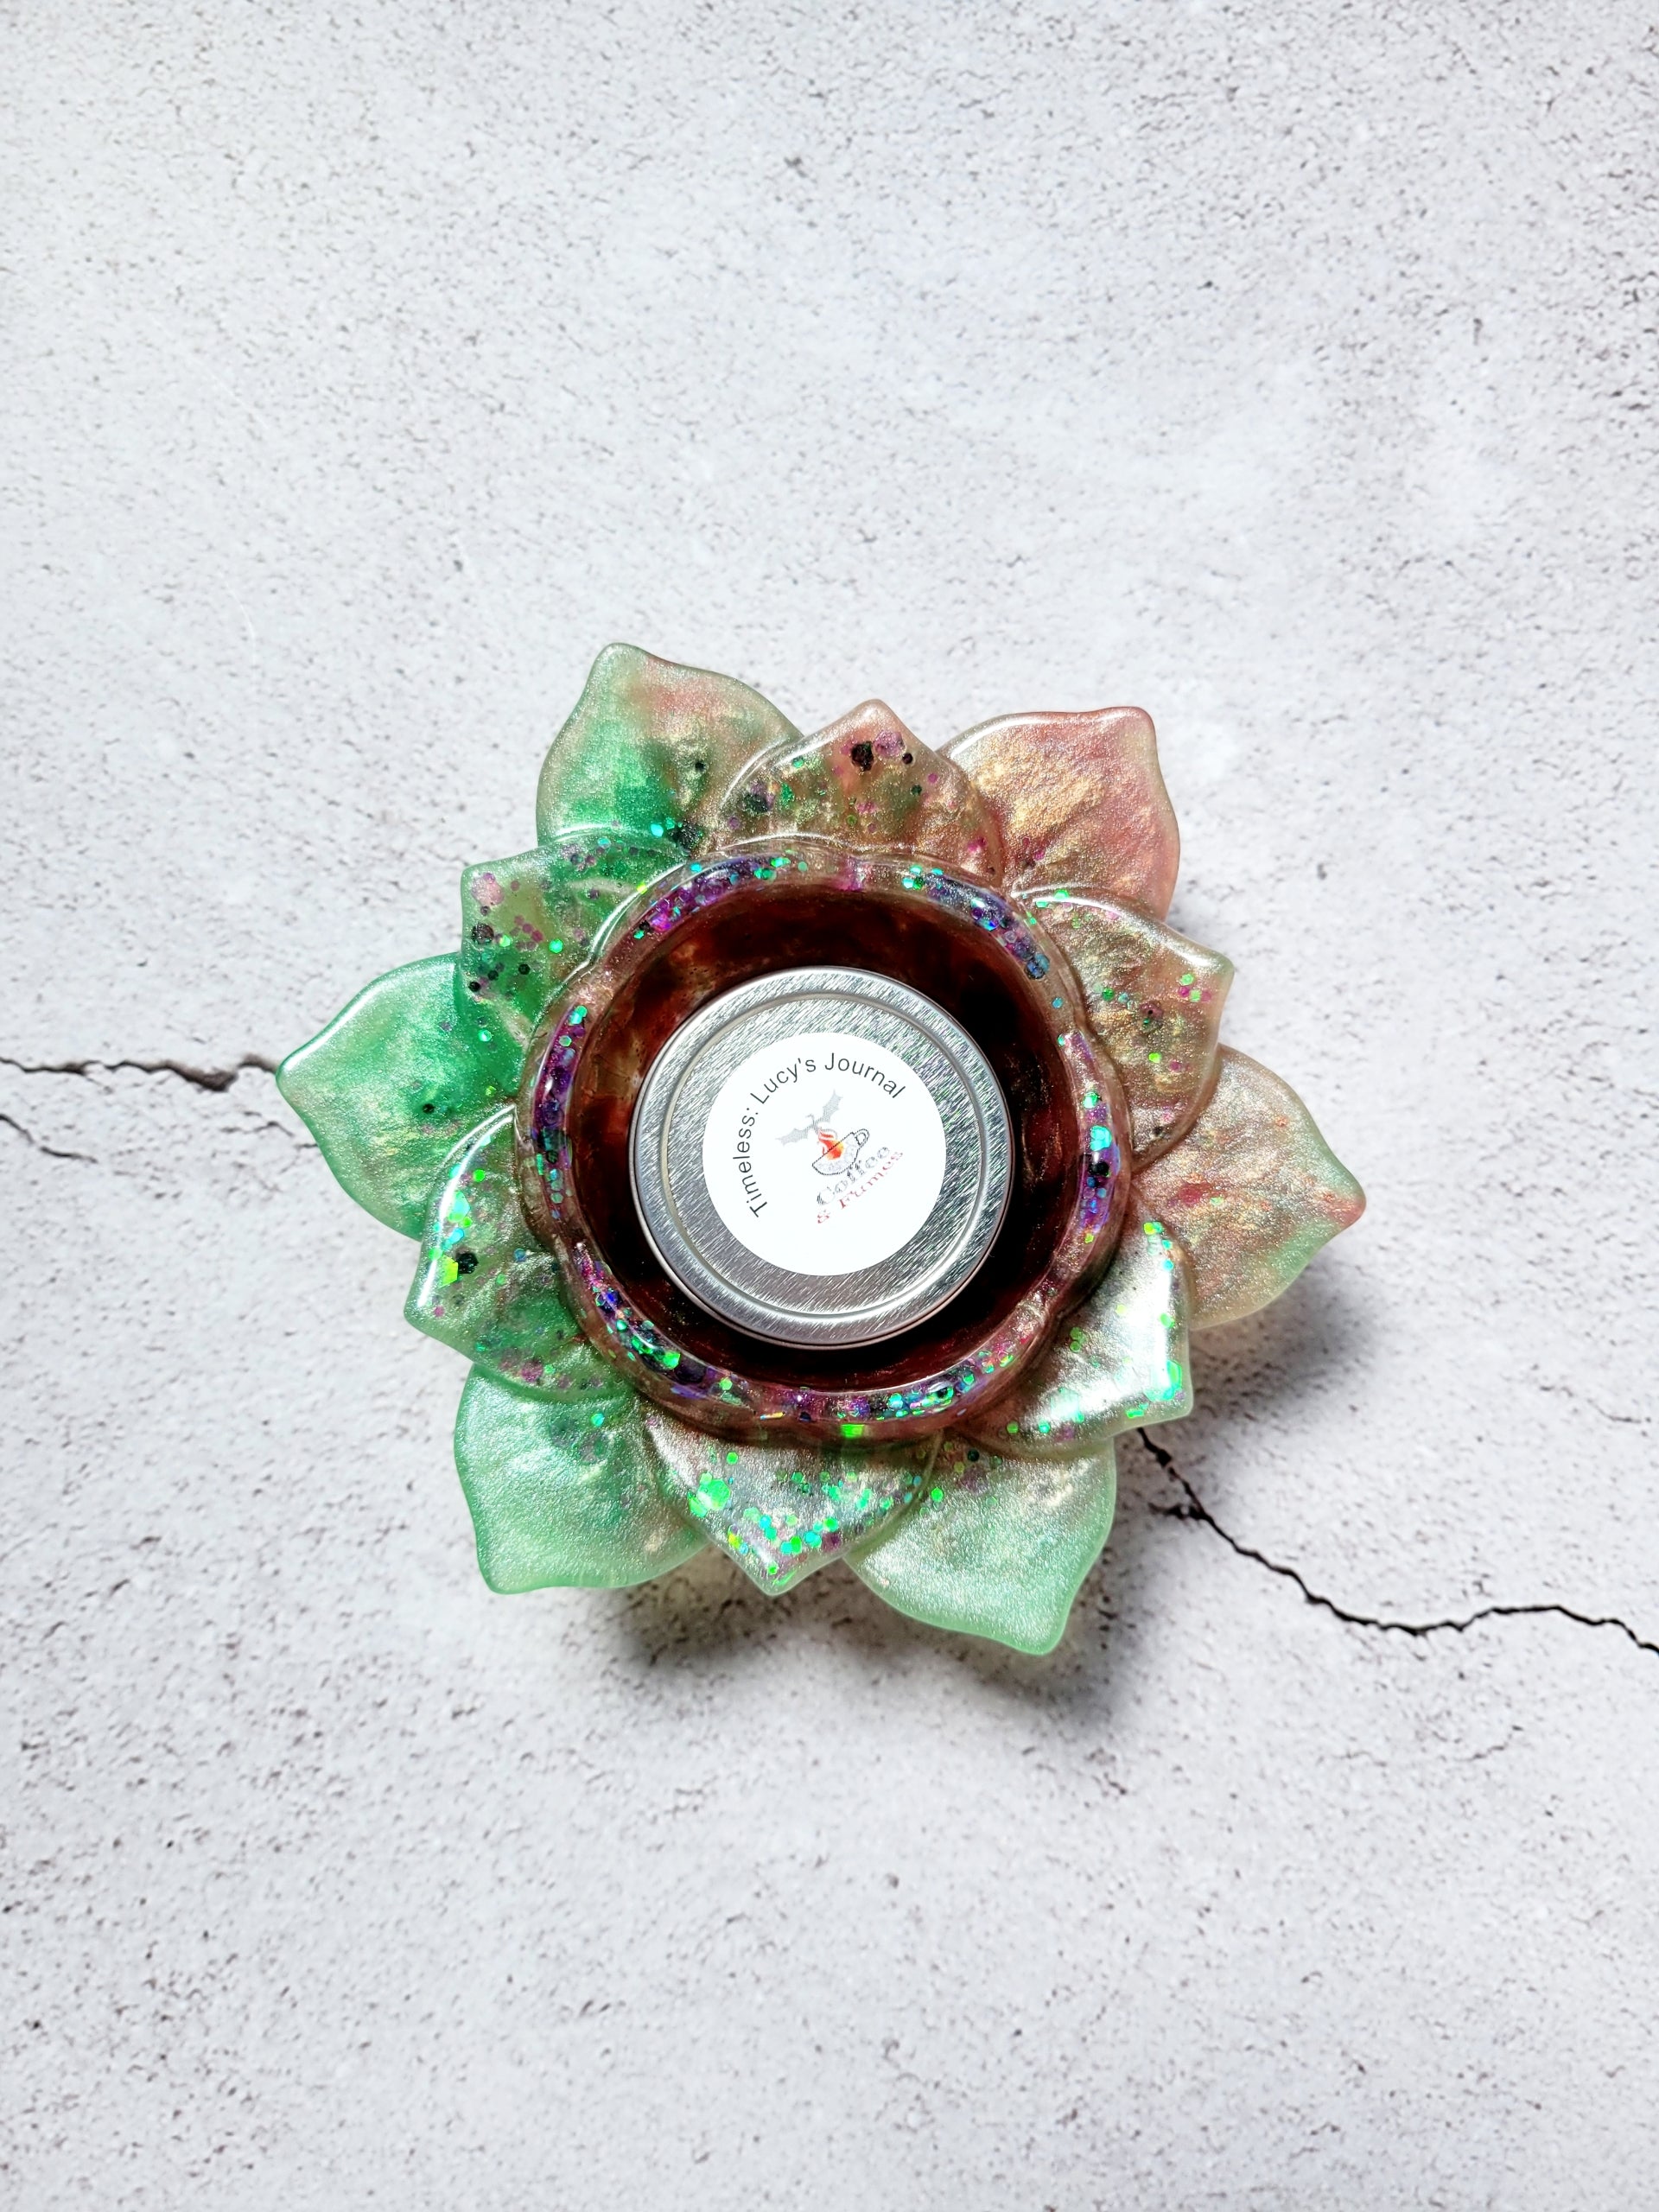 A birds eye view of a tealight candle holder in the style of a lotus flower. It's got green and brown coloring with flecks of colorful glitter along the petals.  There is a tealight candle inside to show size comparison.